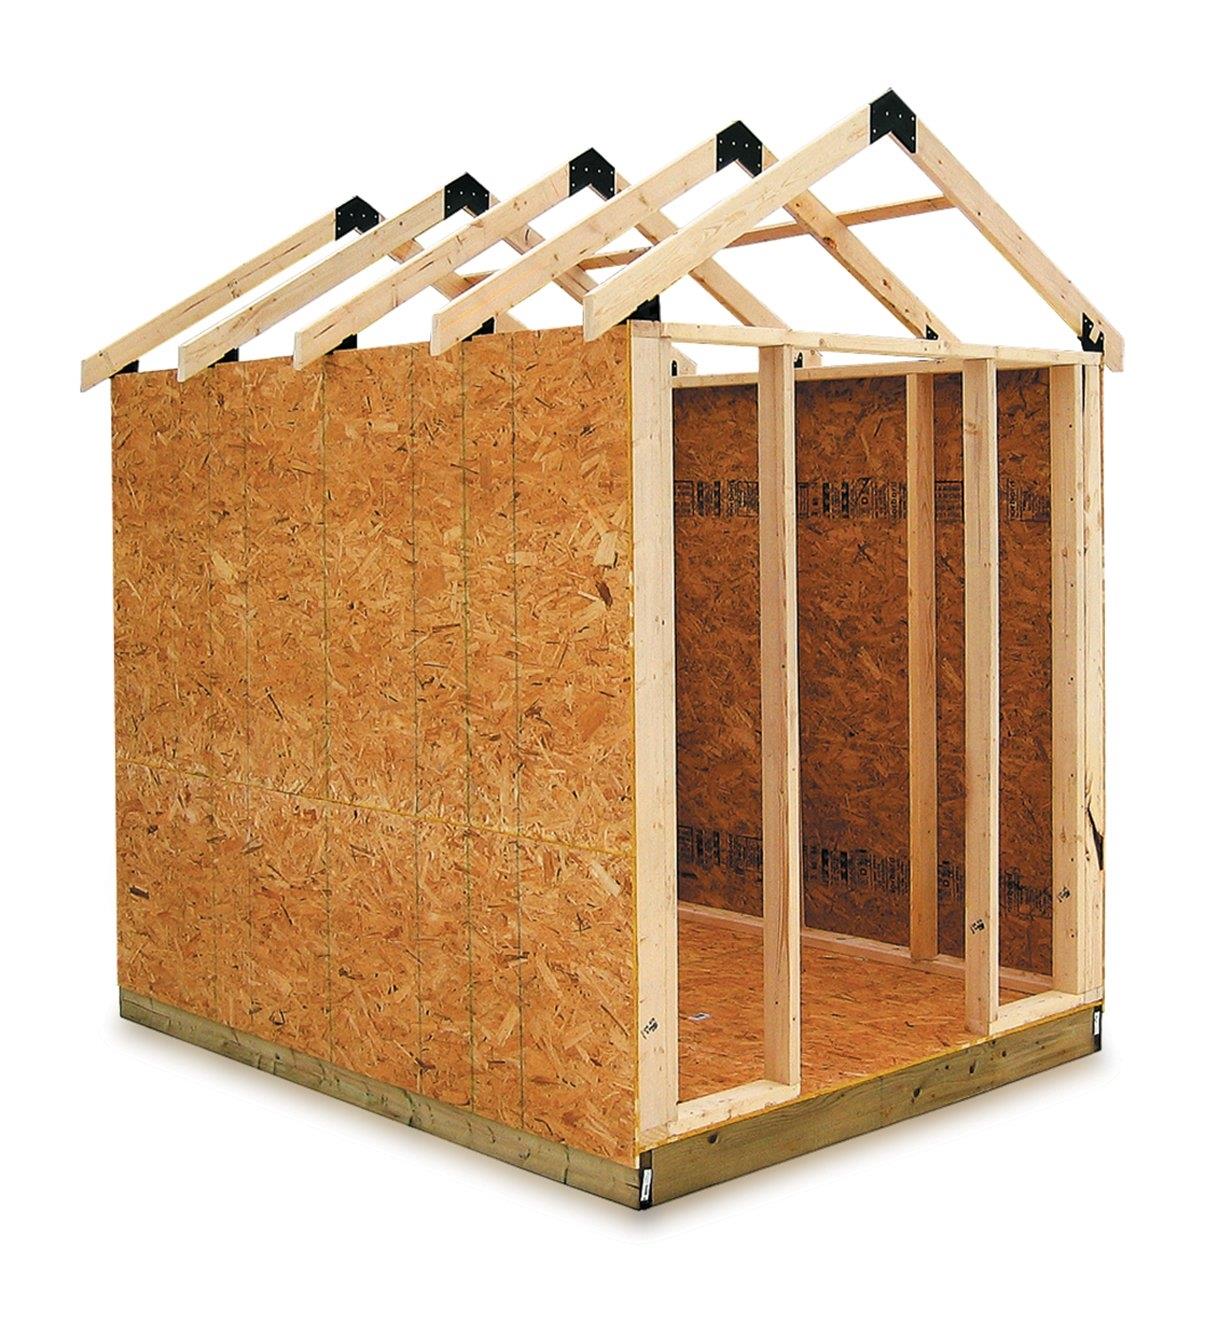 Example of shed built with the Easy Shed Kit